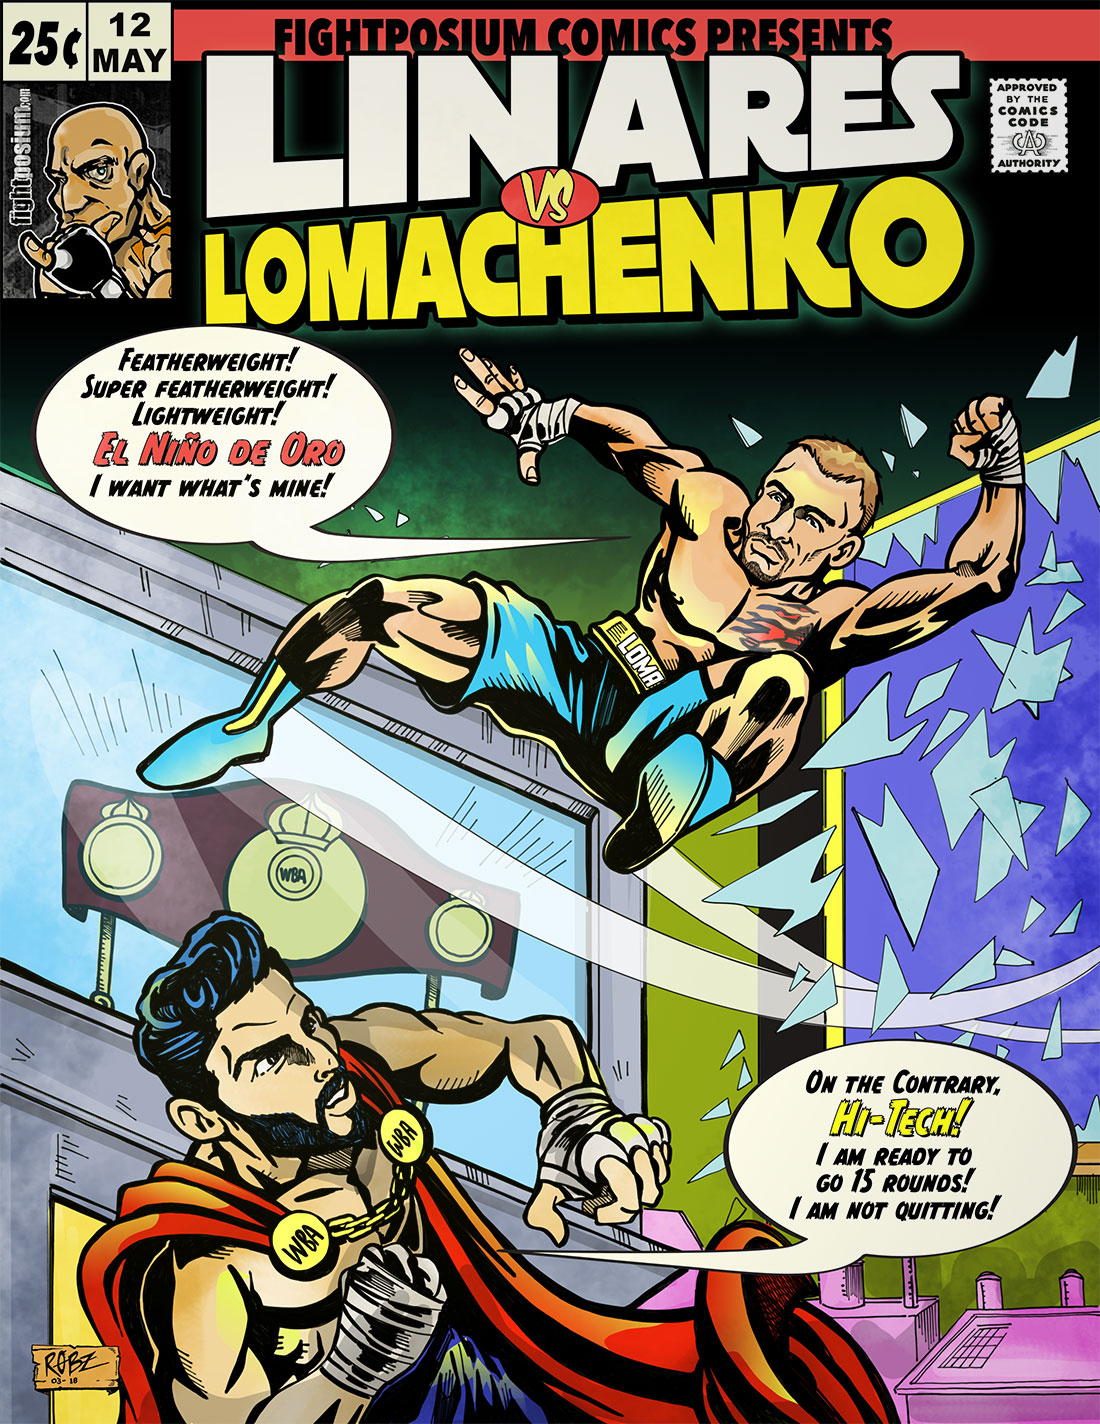 You are currently viewing Linares vs Lomachenko – Hi-Tech vies to be a 3-div Champion!